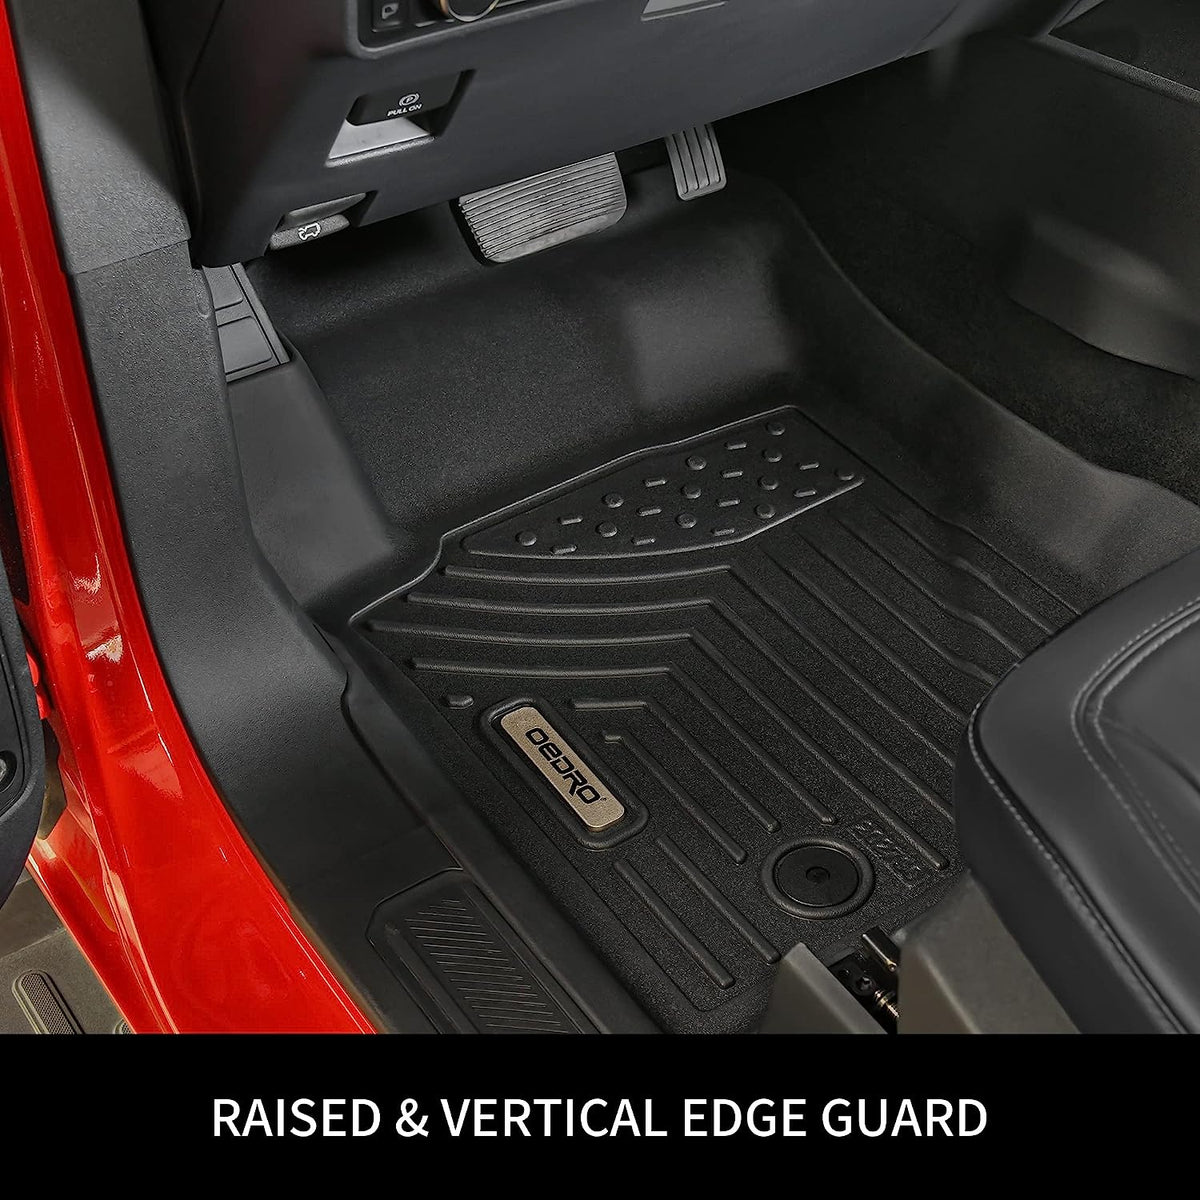 OEDRO Floor Mats Compatible with 2019-2023 Dodge Ram 1500 New Body Crew Cab (NOT for Classic Models), Front Row Bucket Seats, with Under Seat Storage Box, Black TPE All-Weather Guard - Custom Fit